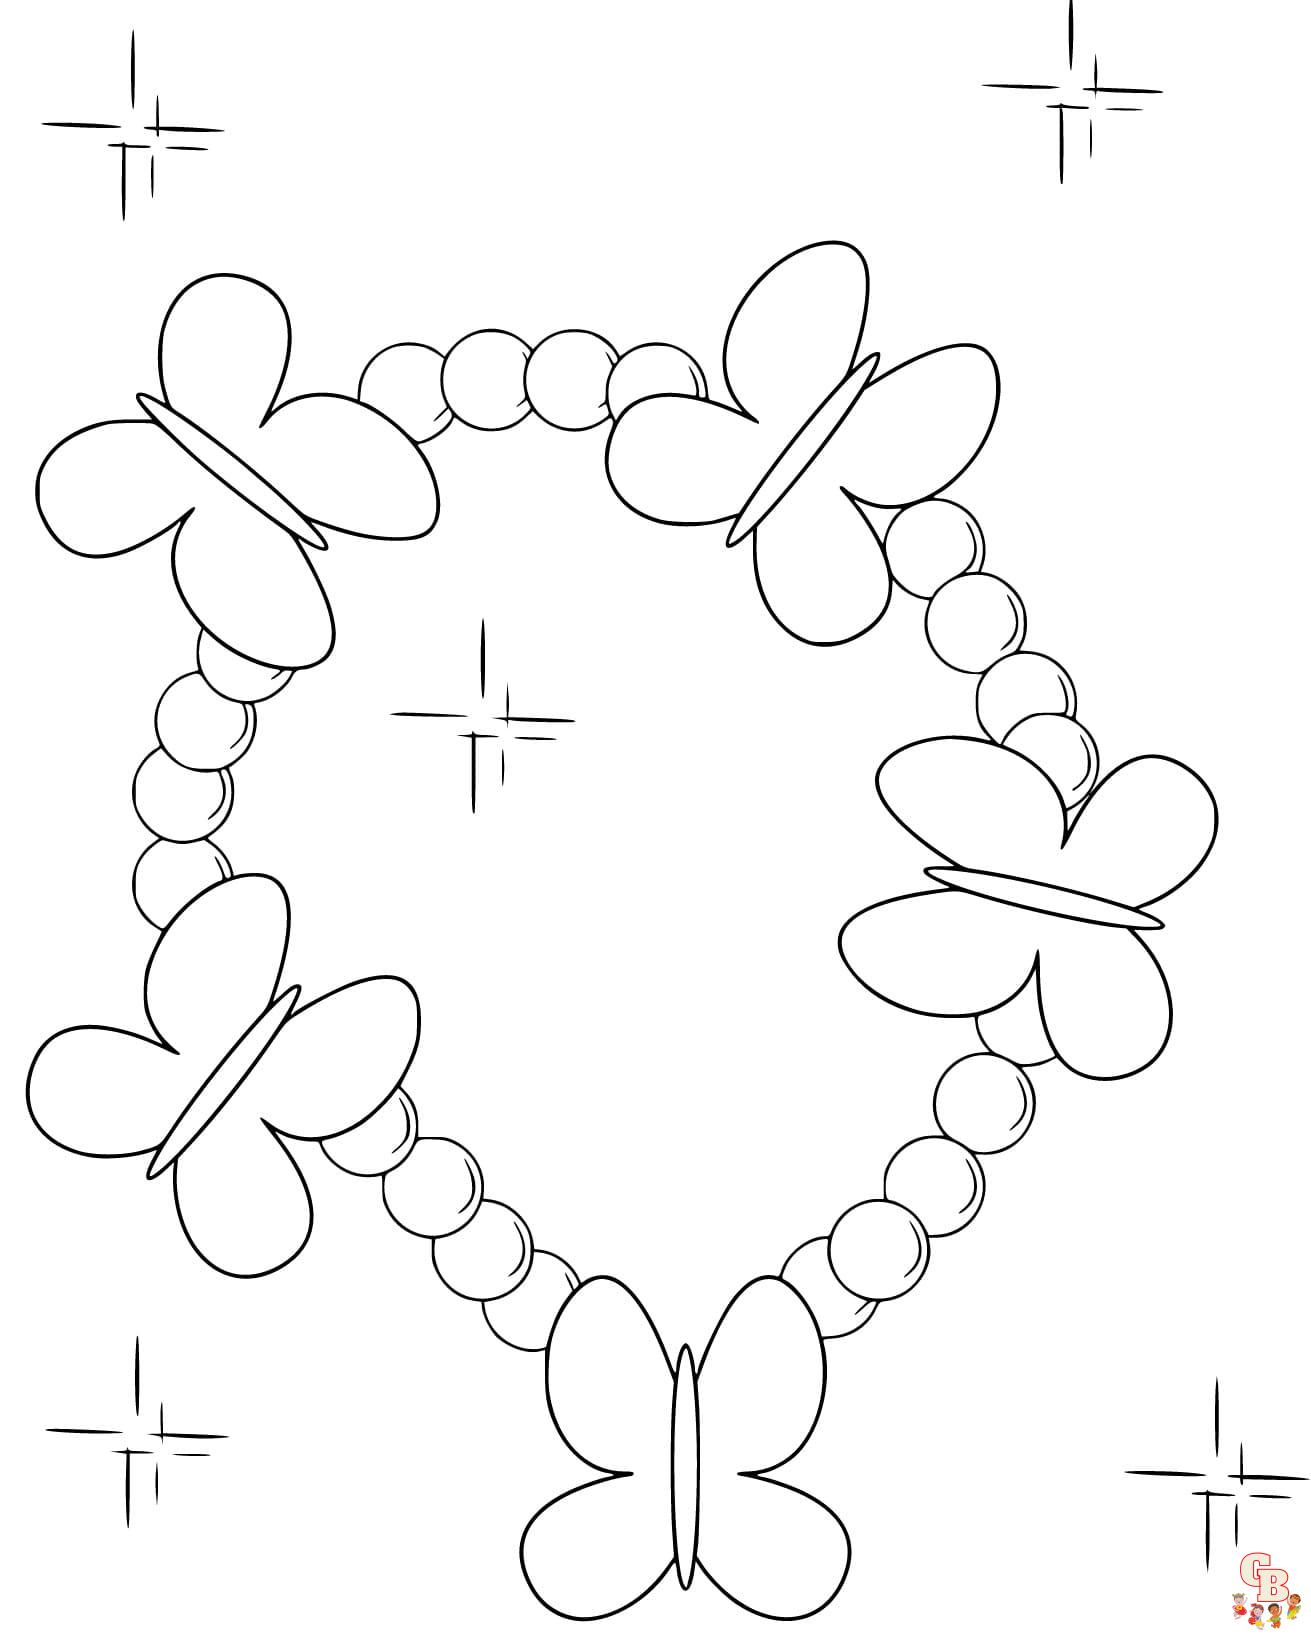 Bracelet coloring pages to print